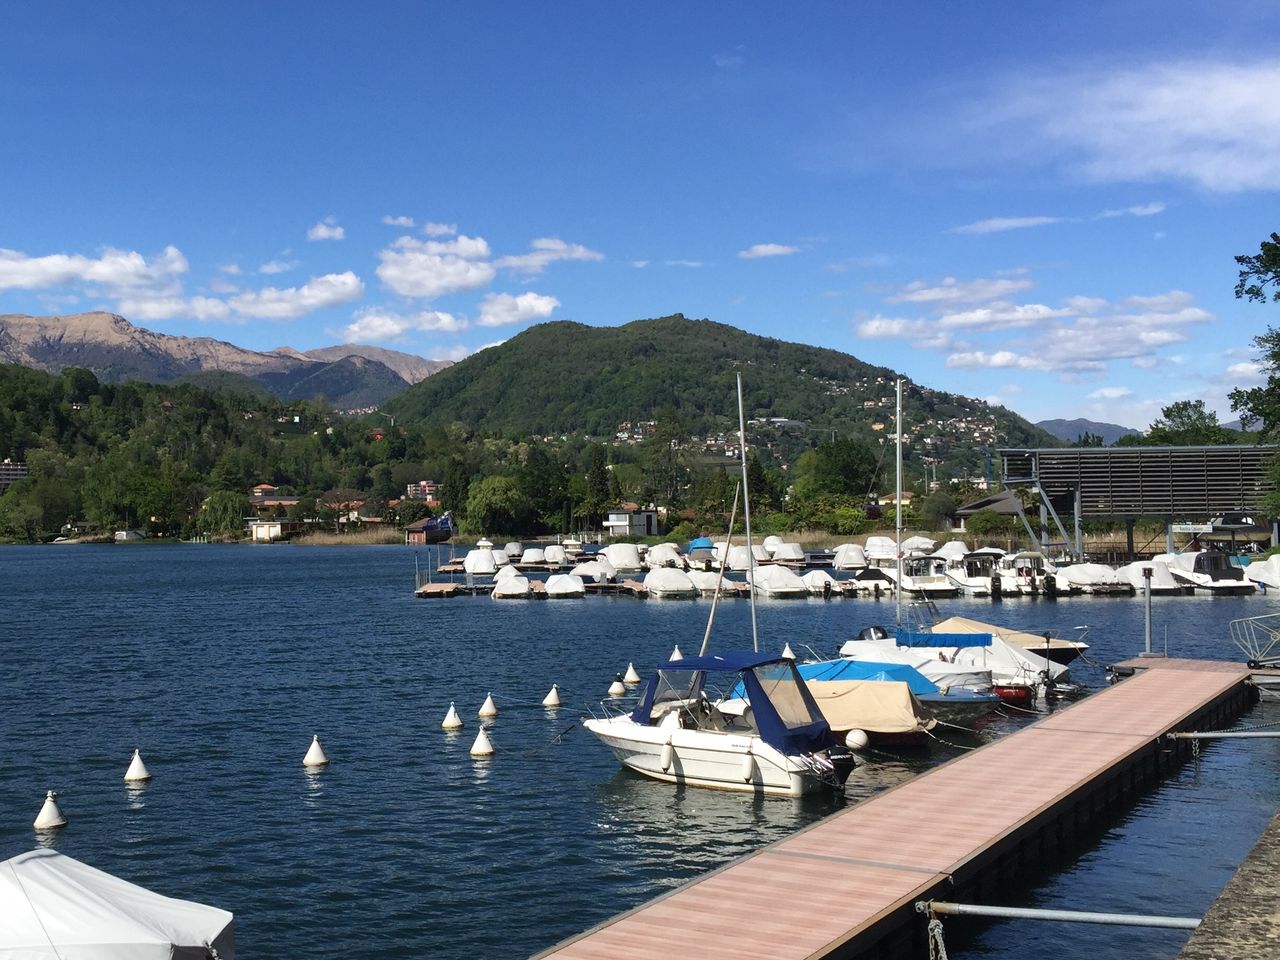 4 Tage Entspannung am Luganersee